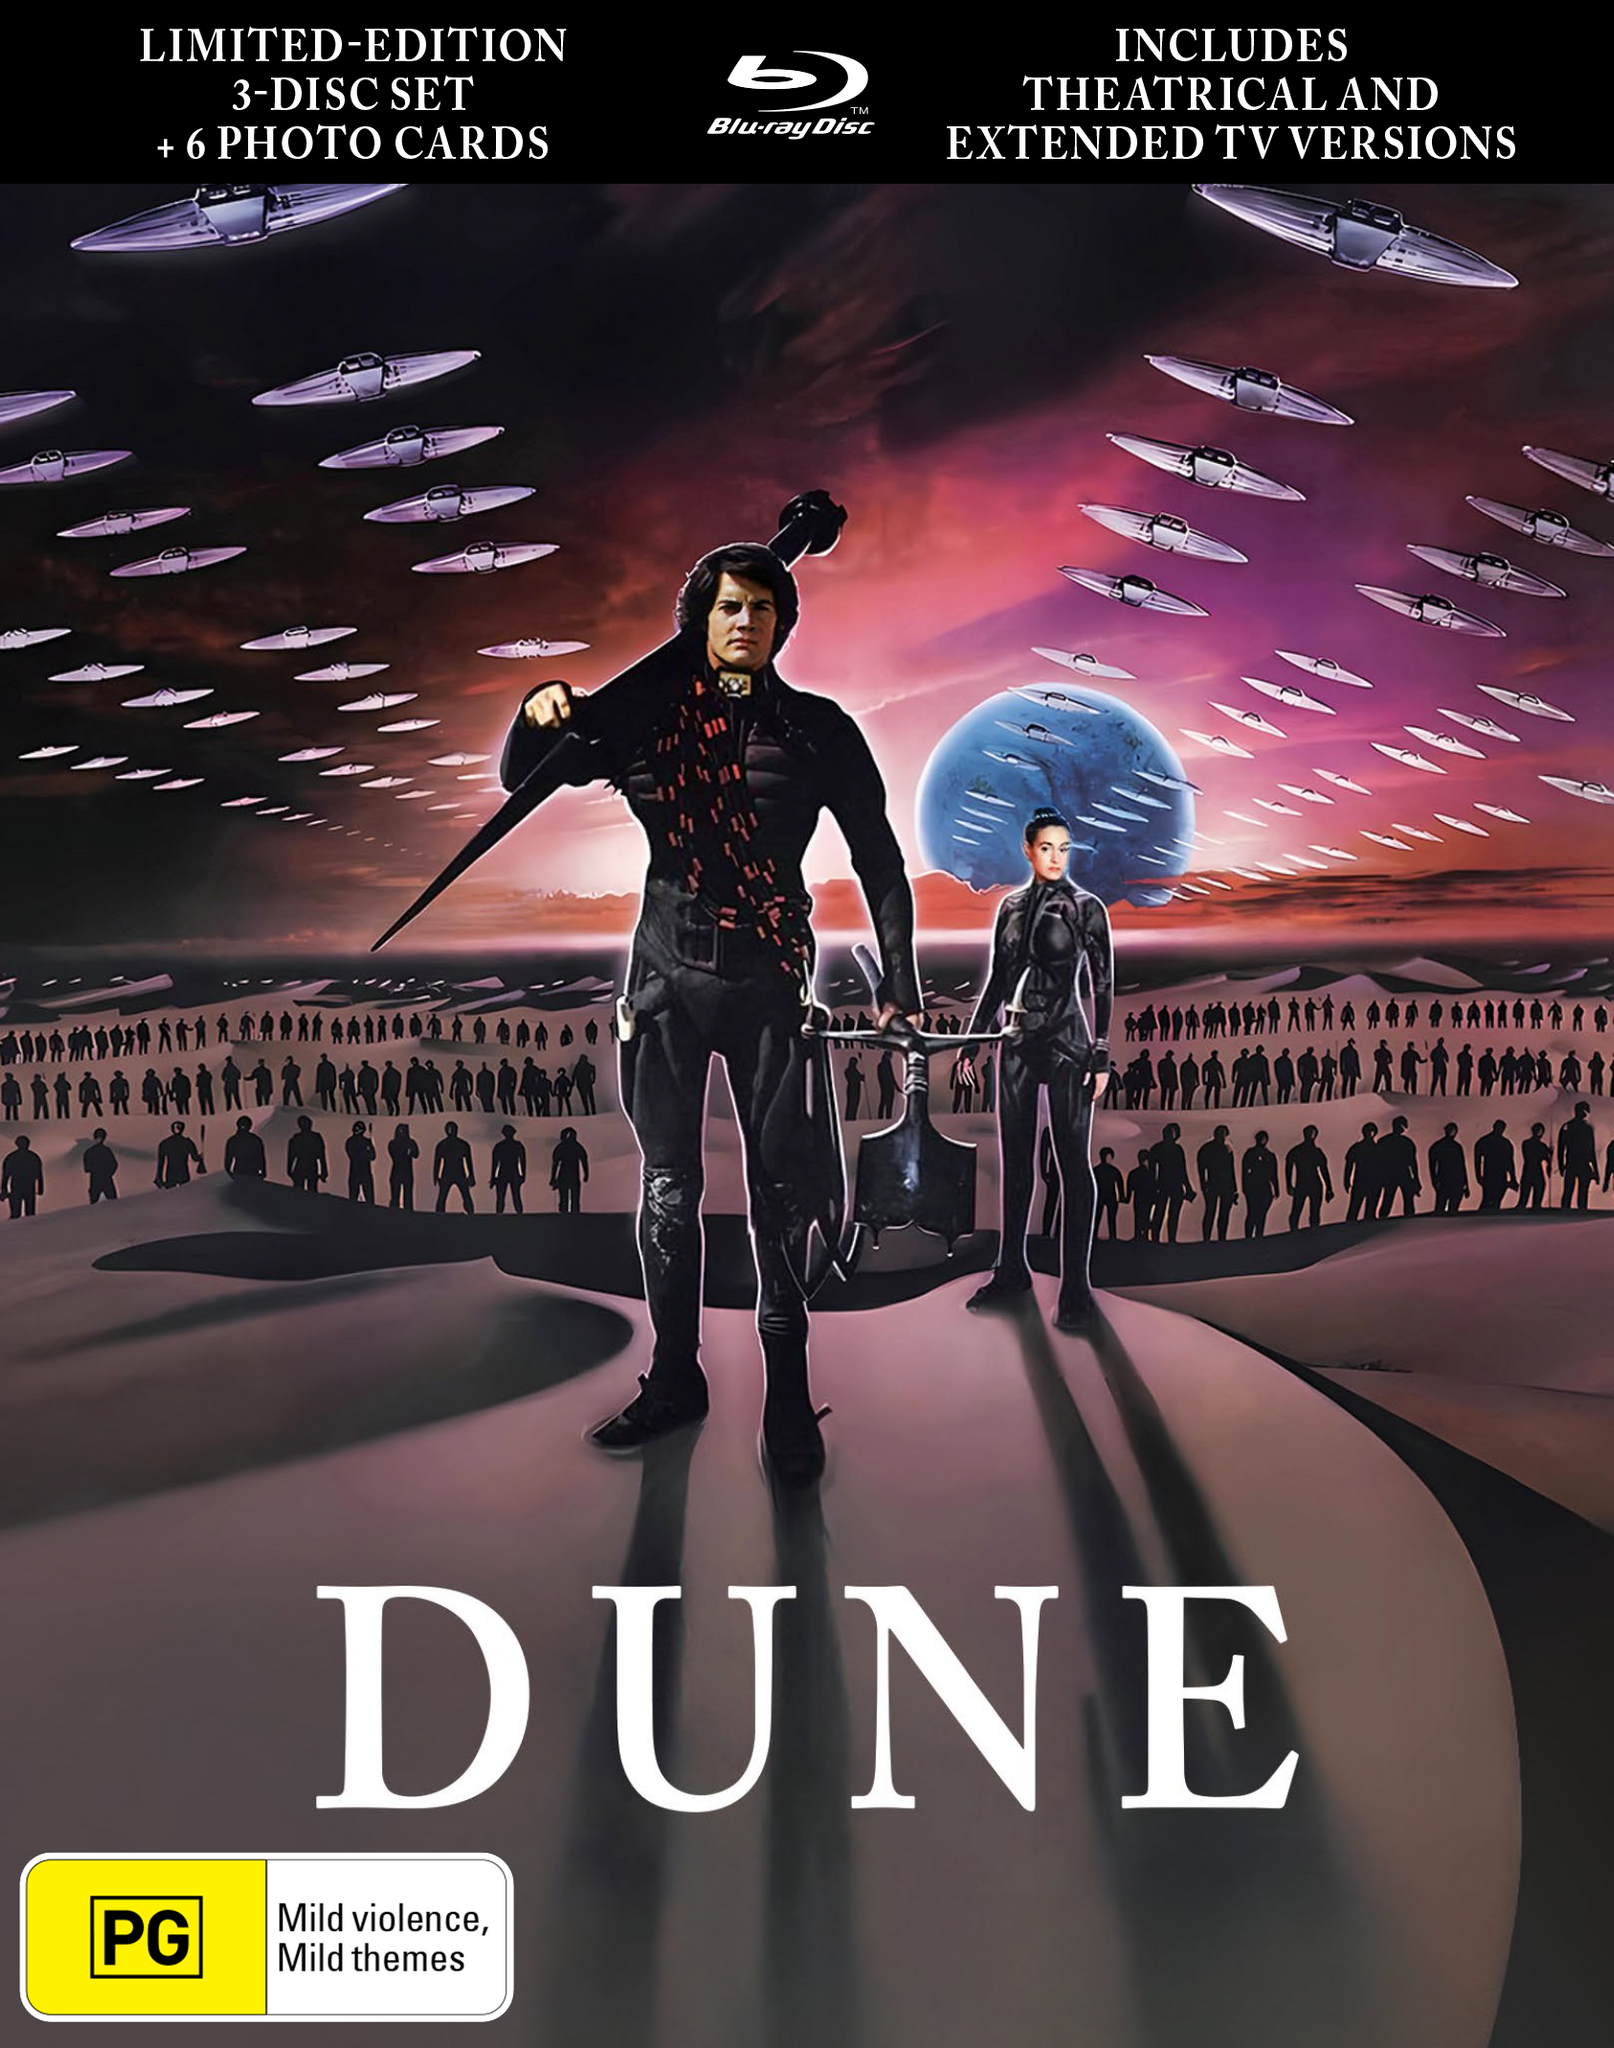 DUNE (1984) - LIMITED EDITION BLU-RAY (LENTICULAR HARDCOVER + PHOTO CARDS)